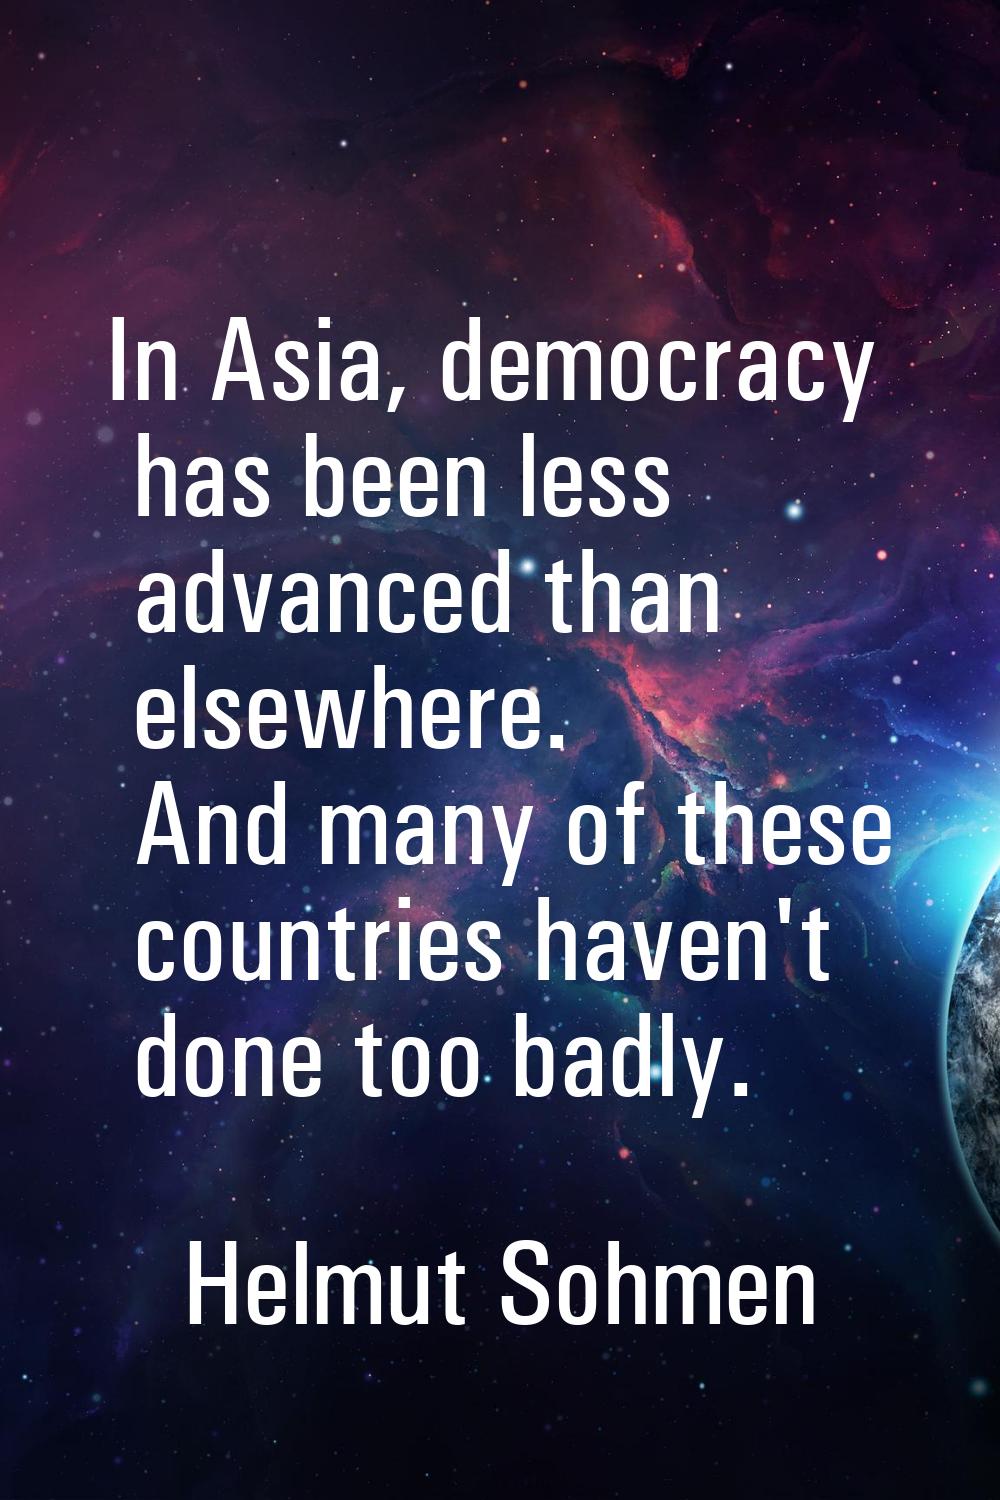 In Asia, democracy has been less advanced than elsewhere. And many of these countries haven't done 